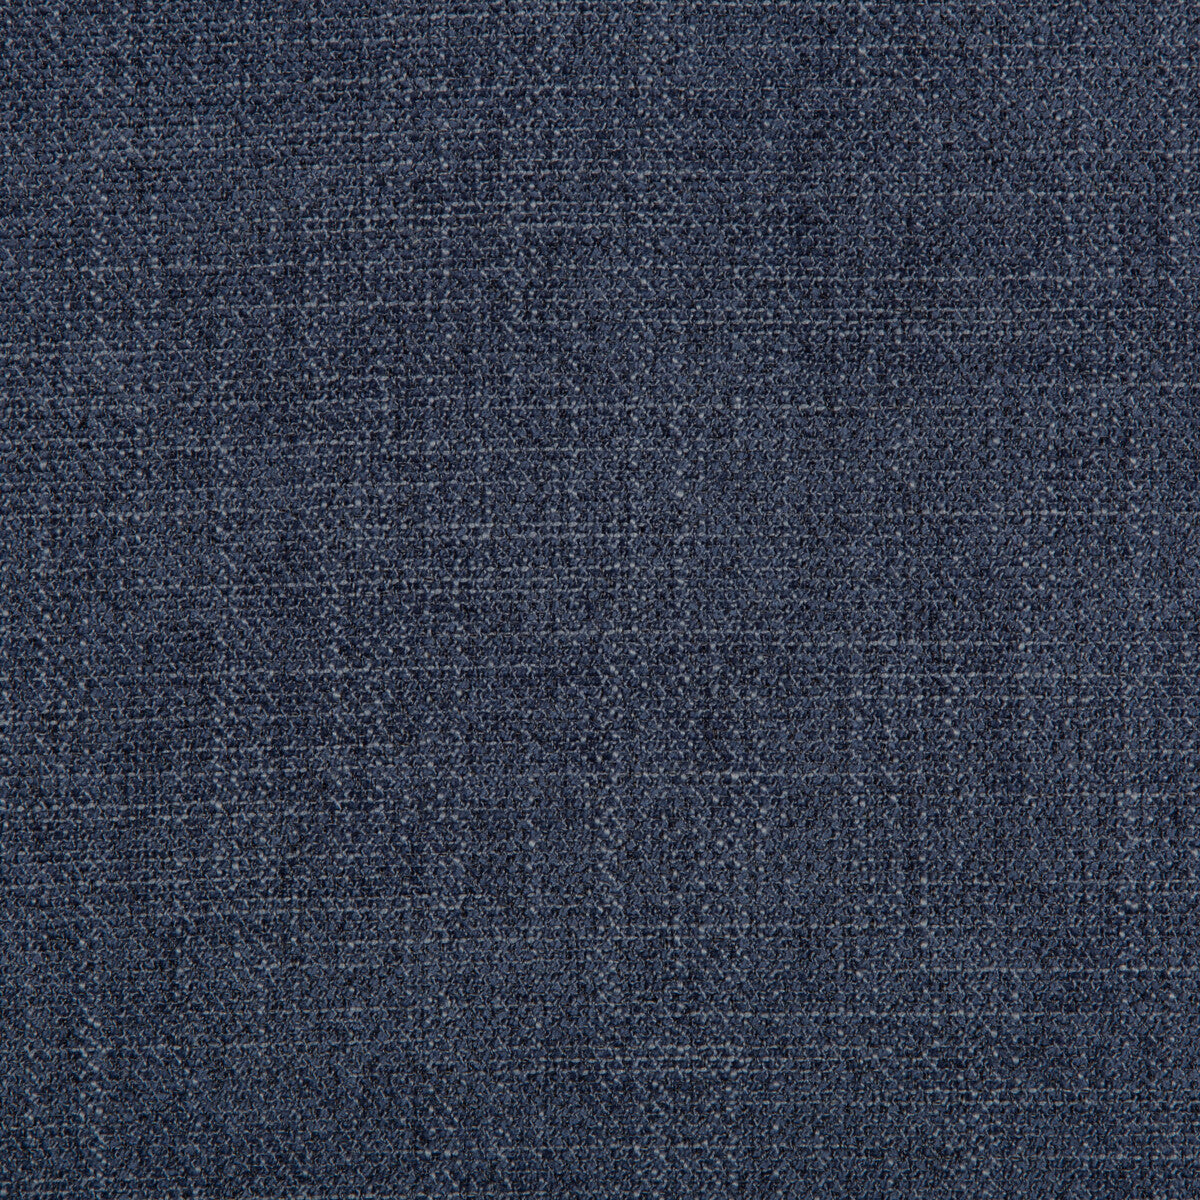 Kf Smt fabric - pattern 35390.5.0 - by Kravet Smart in the Performance Crypton Home collection